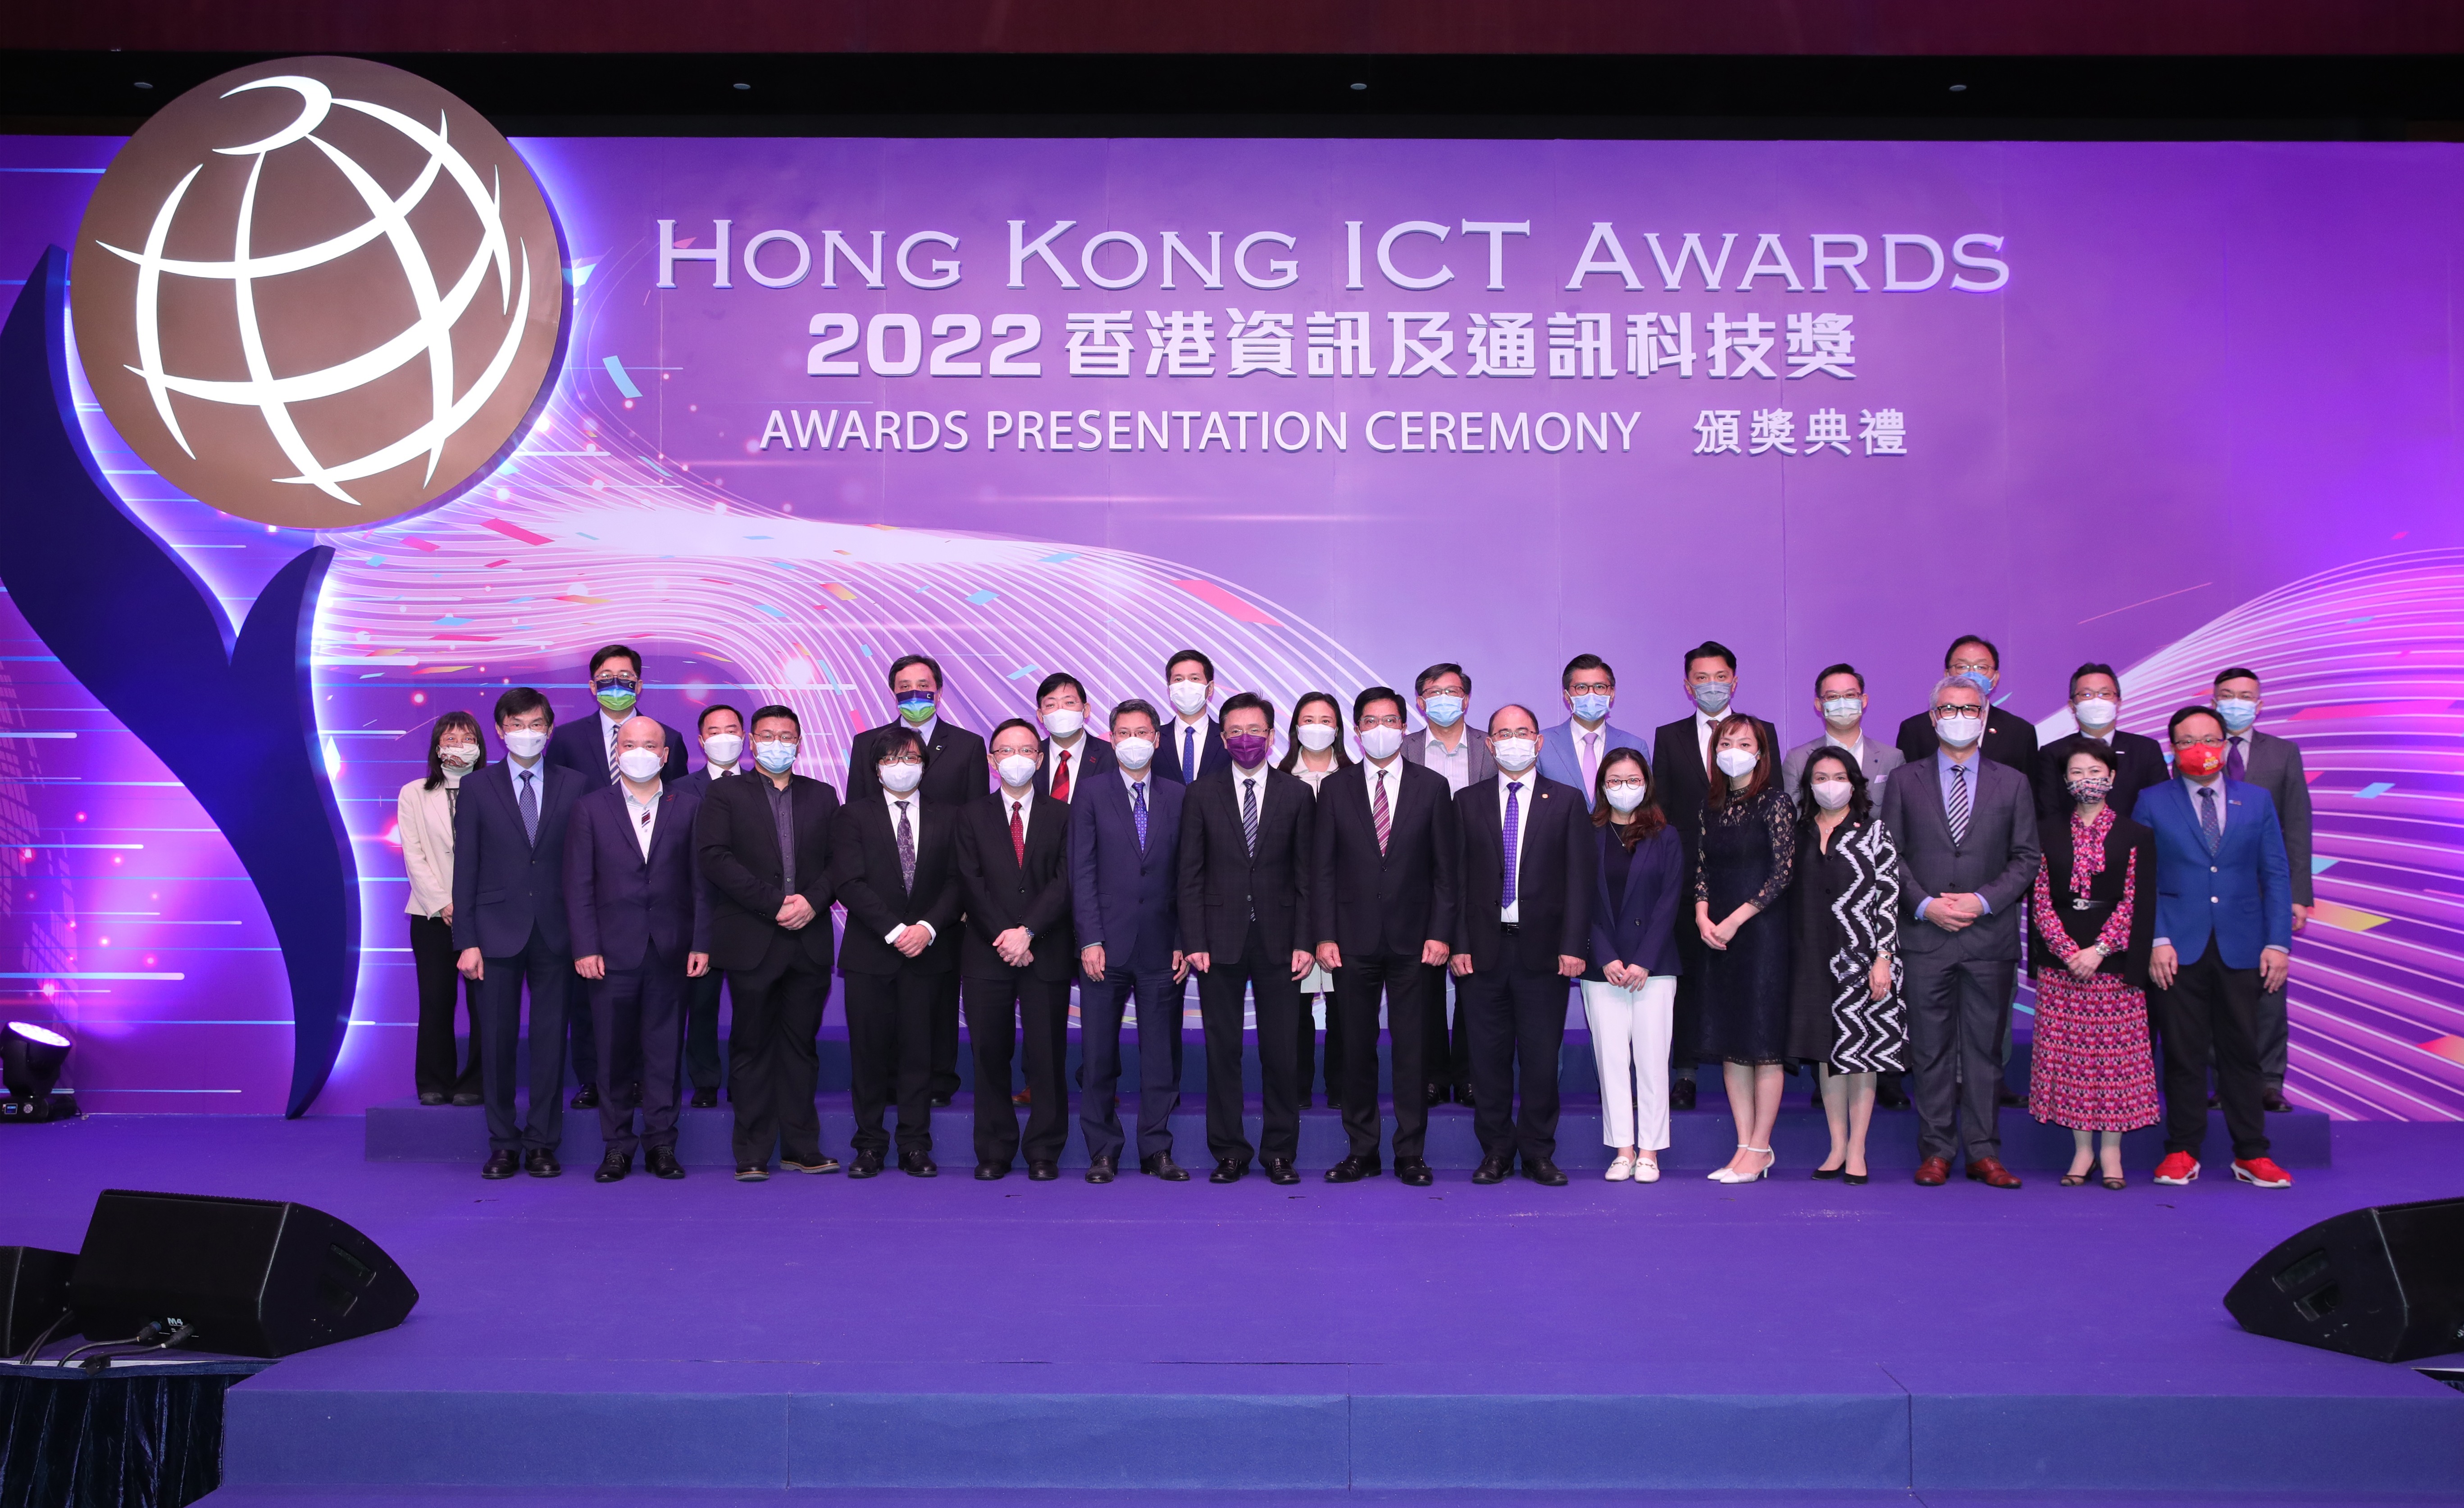 Hong Kong ICT Awards 2022 Awards Presentation Ceremony VIPs, Leading Organisers & Steering Committee Group Photo